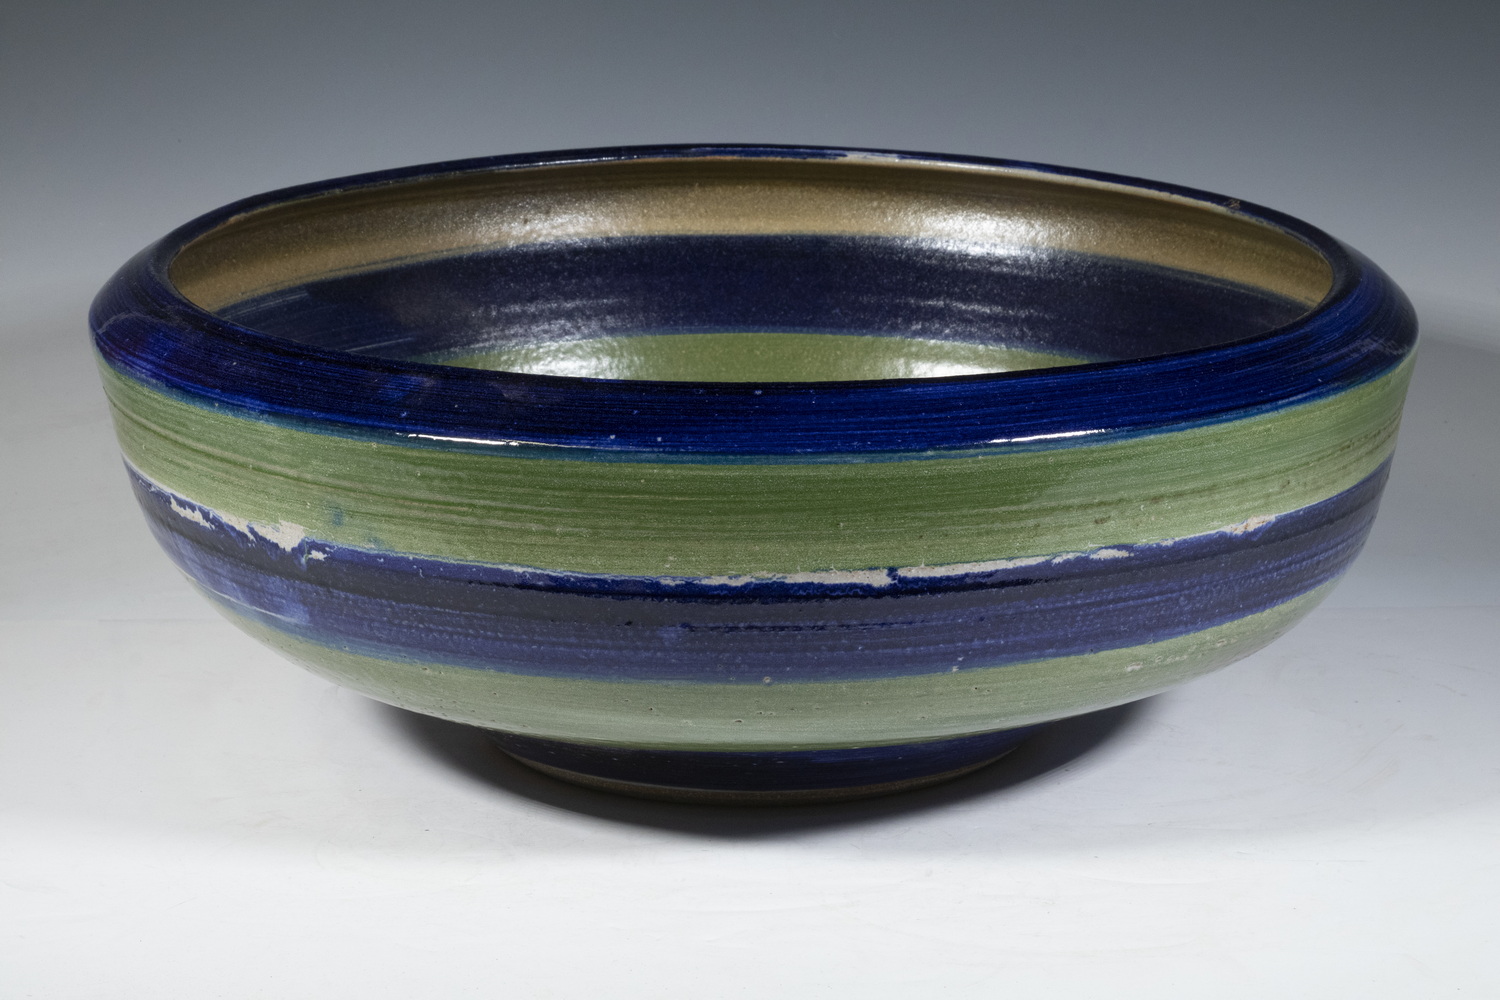 ART POTTERY BOWL BY DONALD SUTHERLAND 302182